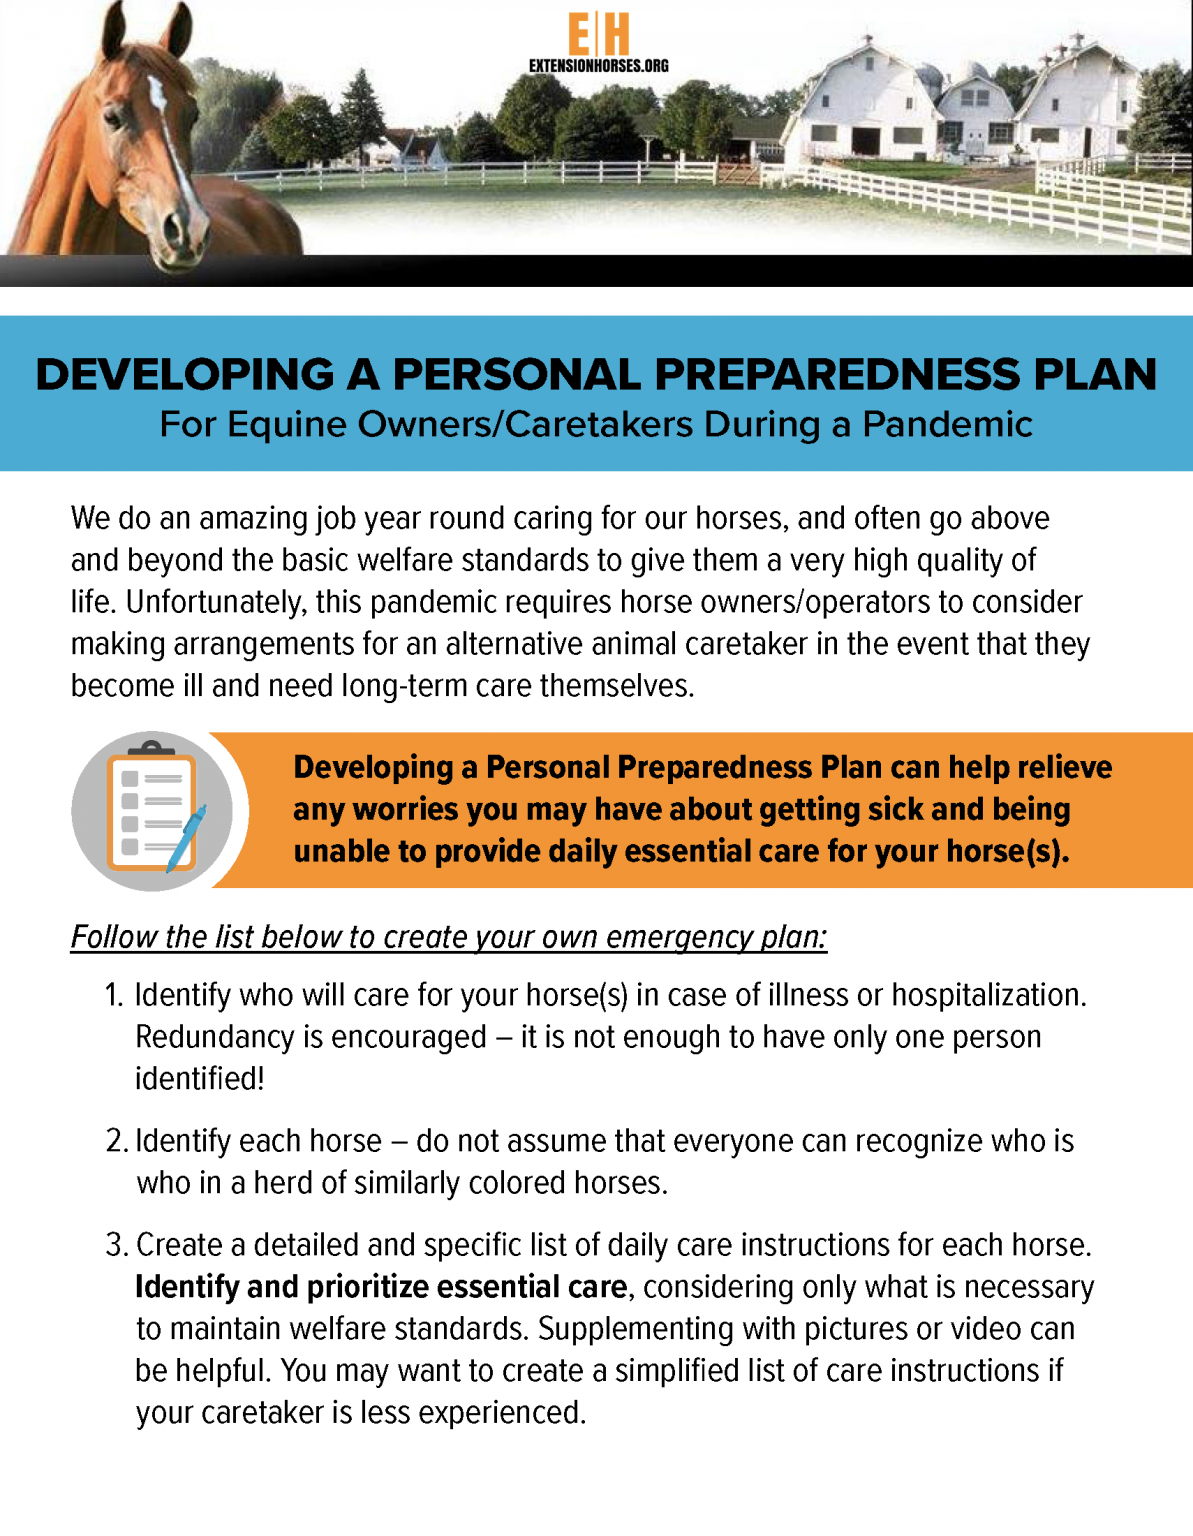 Personal-Preparedness-Plan-for-Equine-Owners_Page_1-1193x1536.png